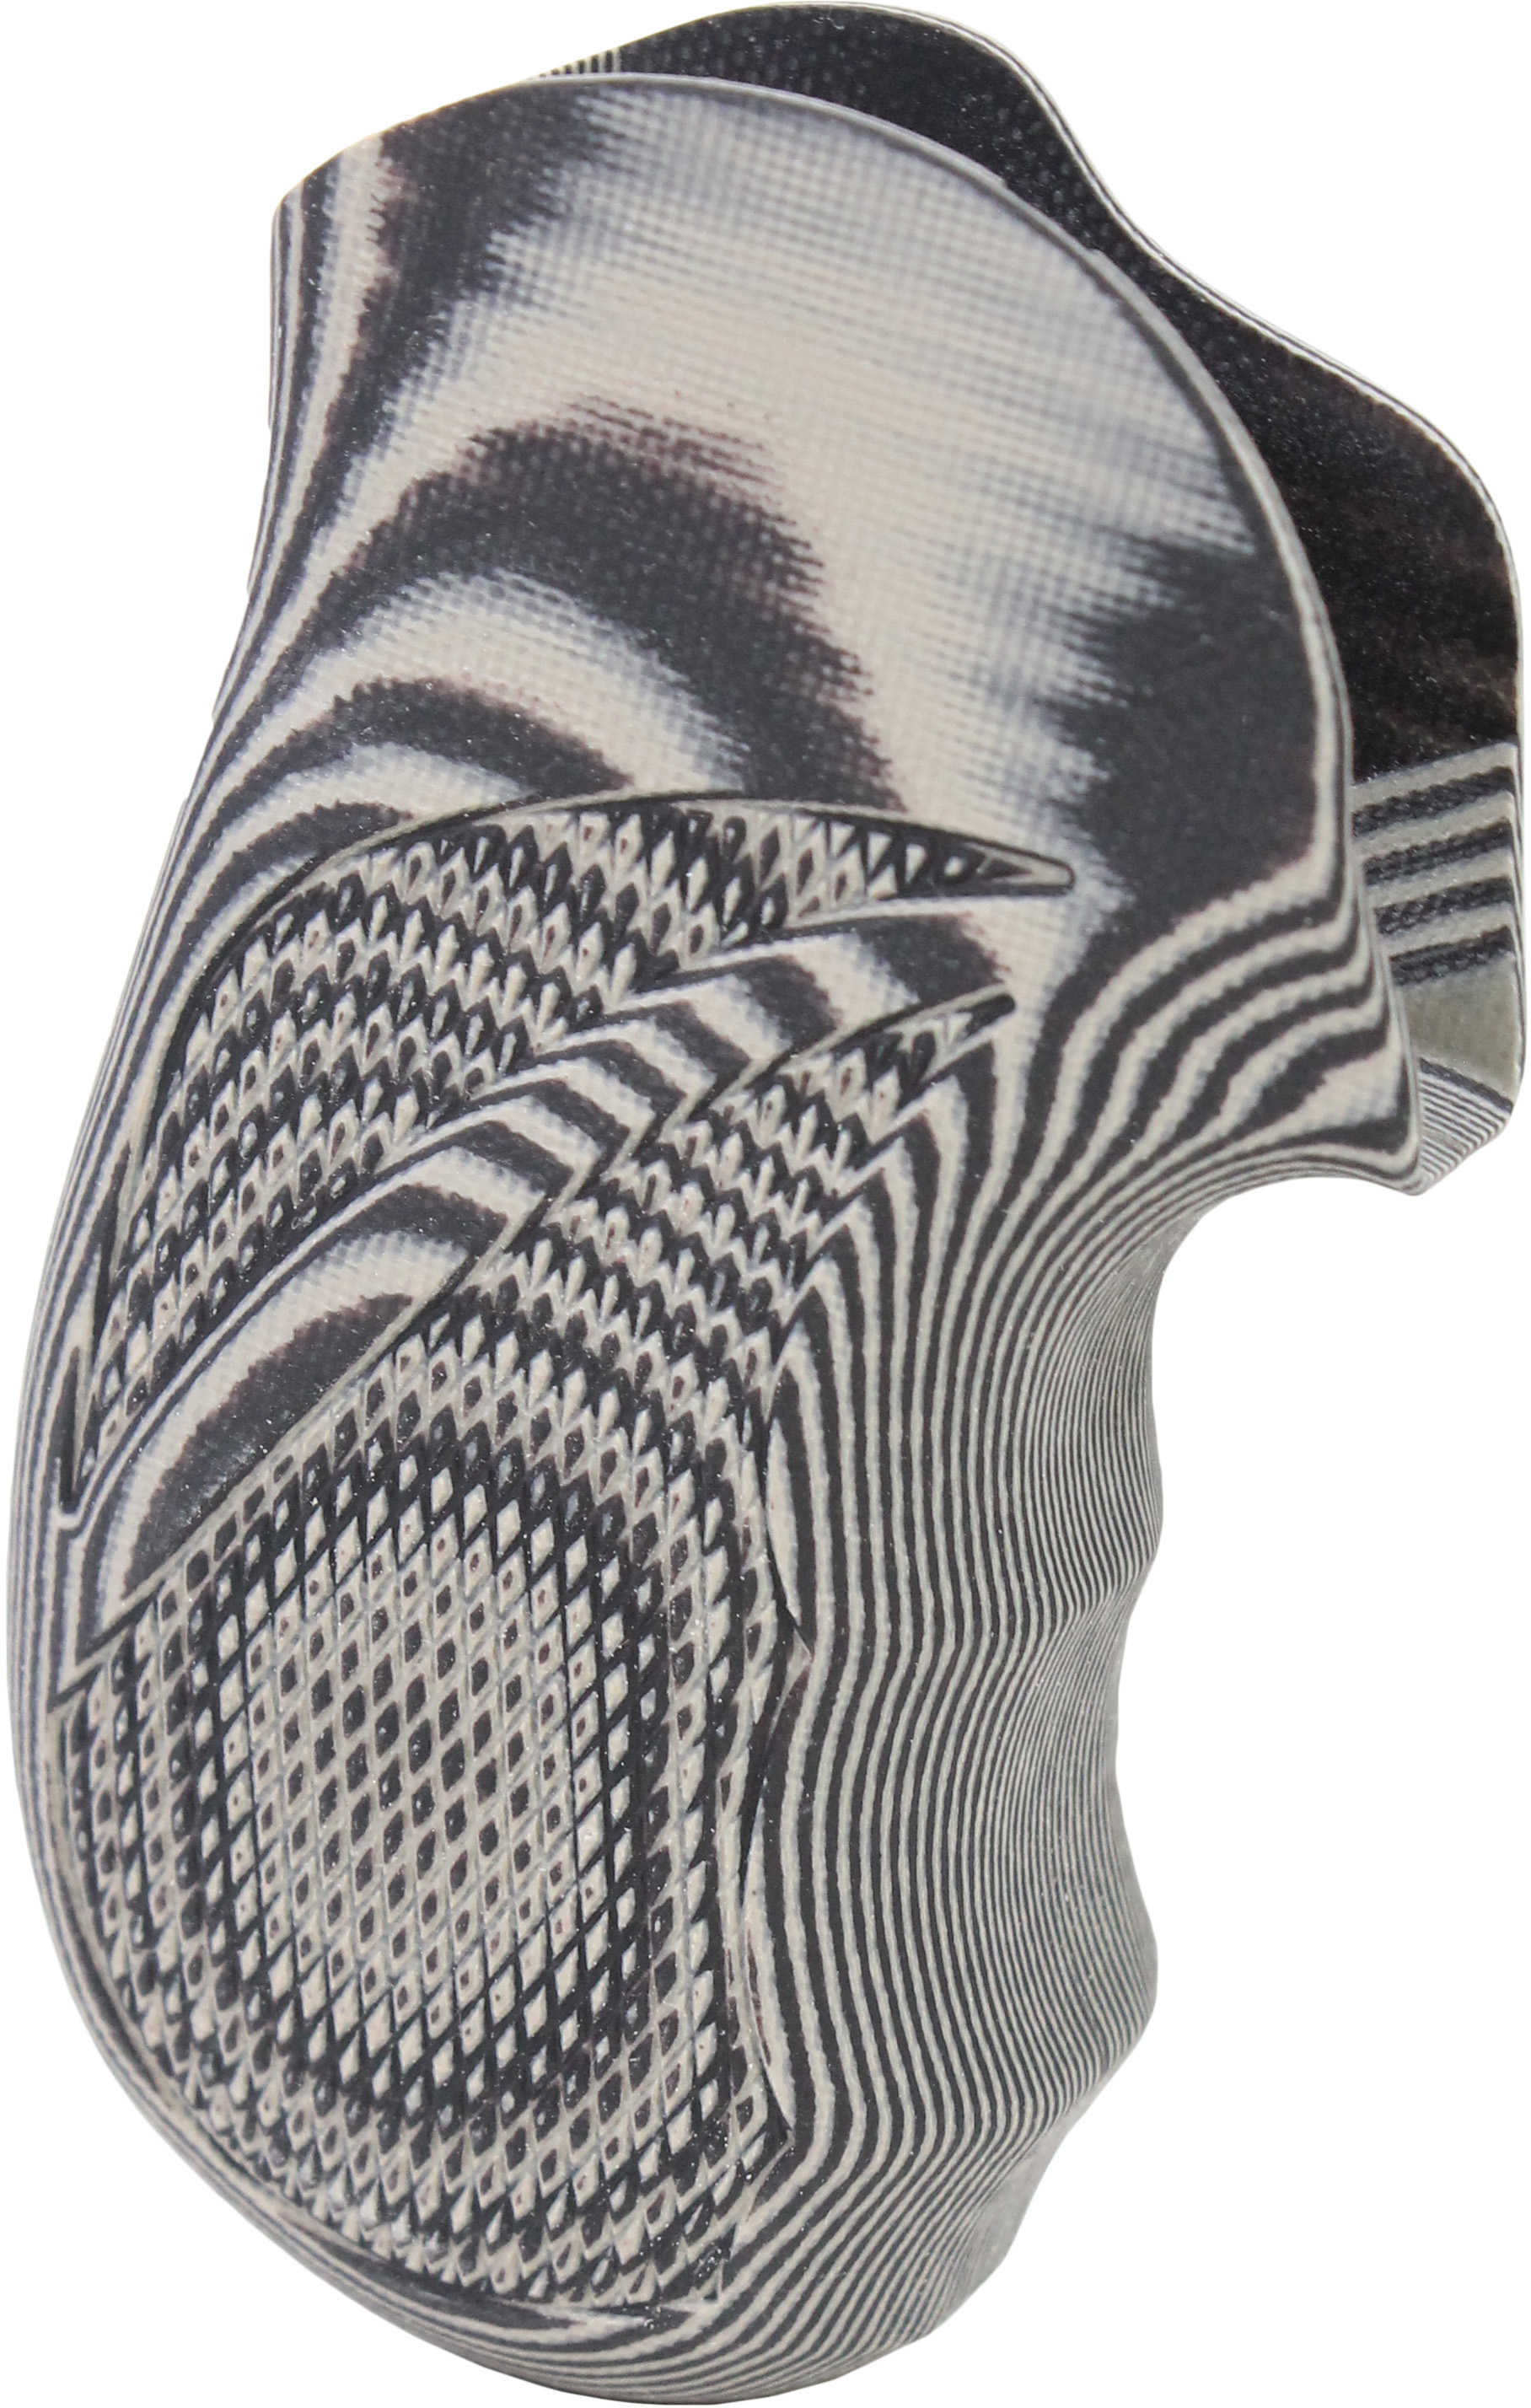 Pachmayr 61232 G10 Tactical Grips Ruger LCR Laminate Checkered Gray/Black